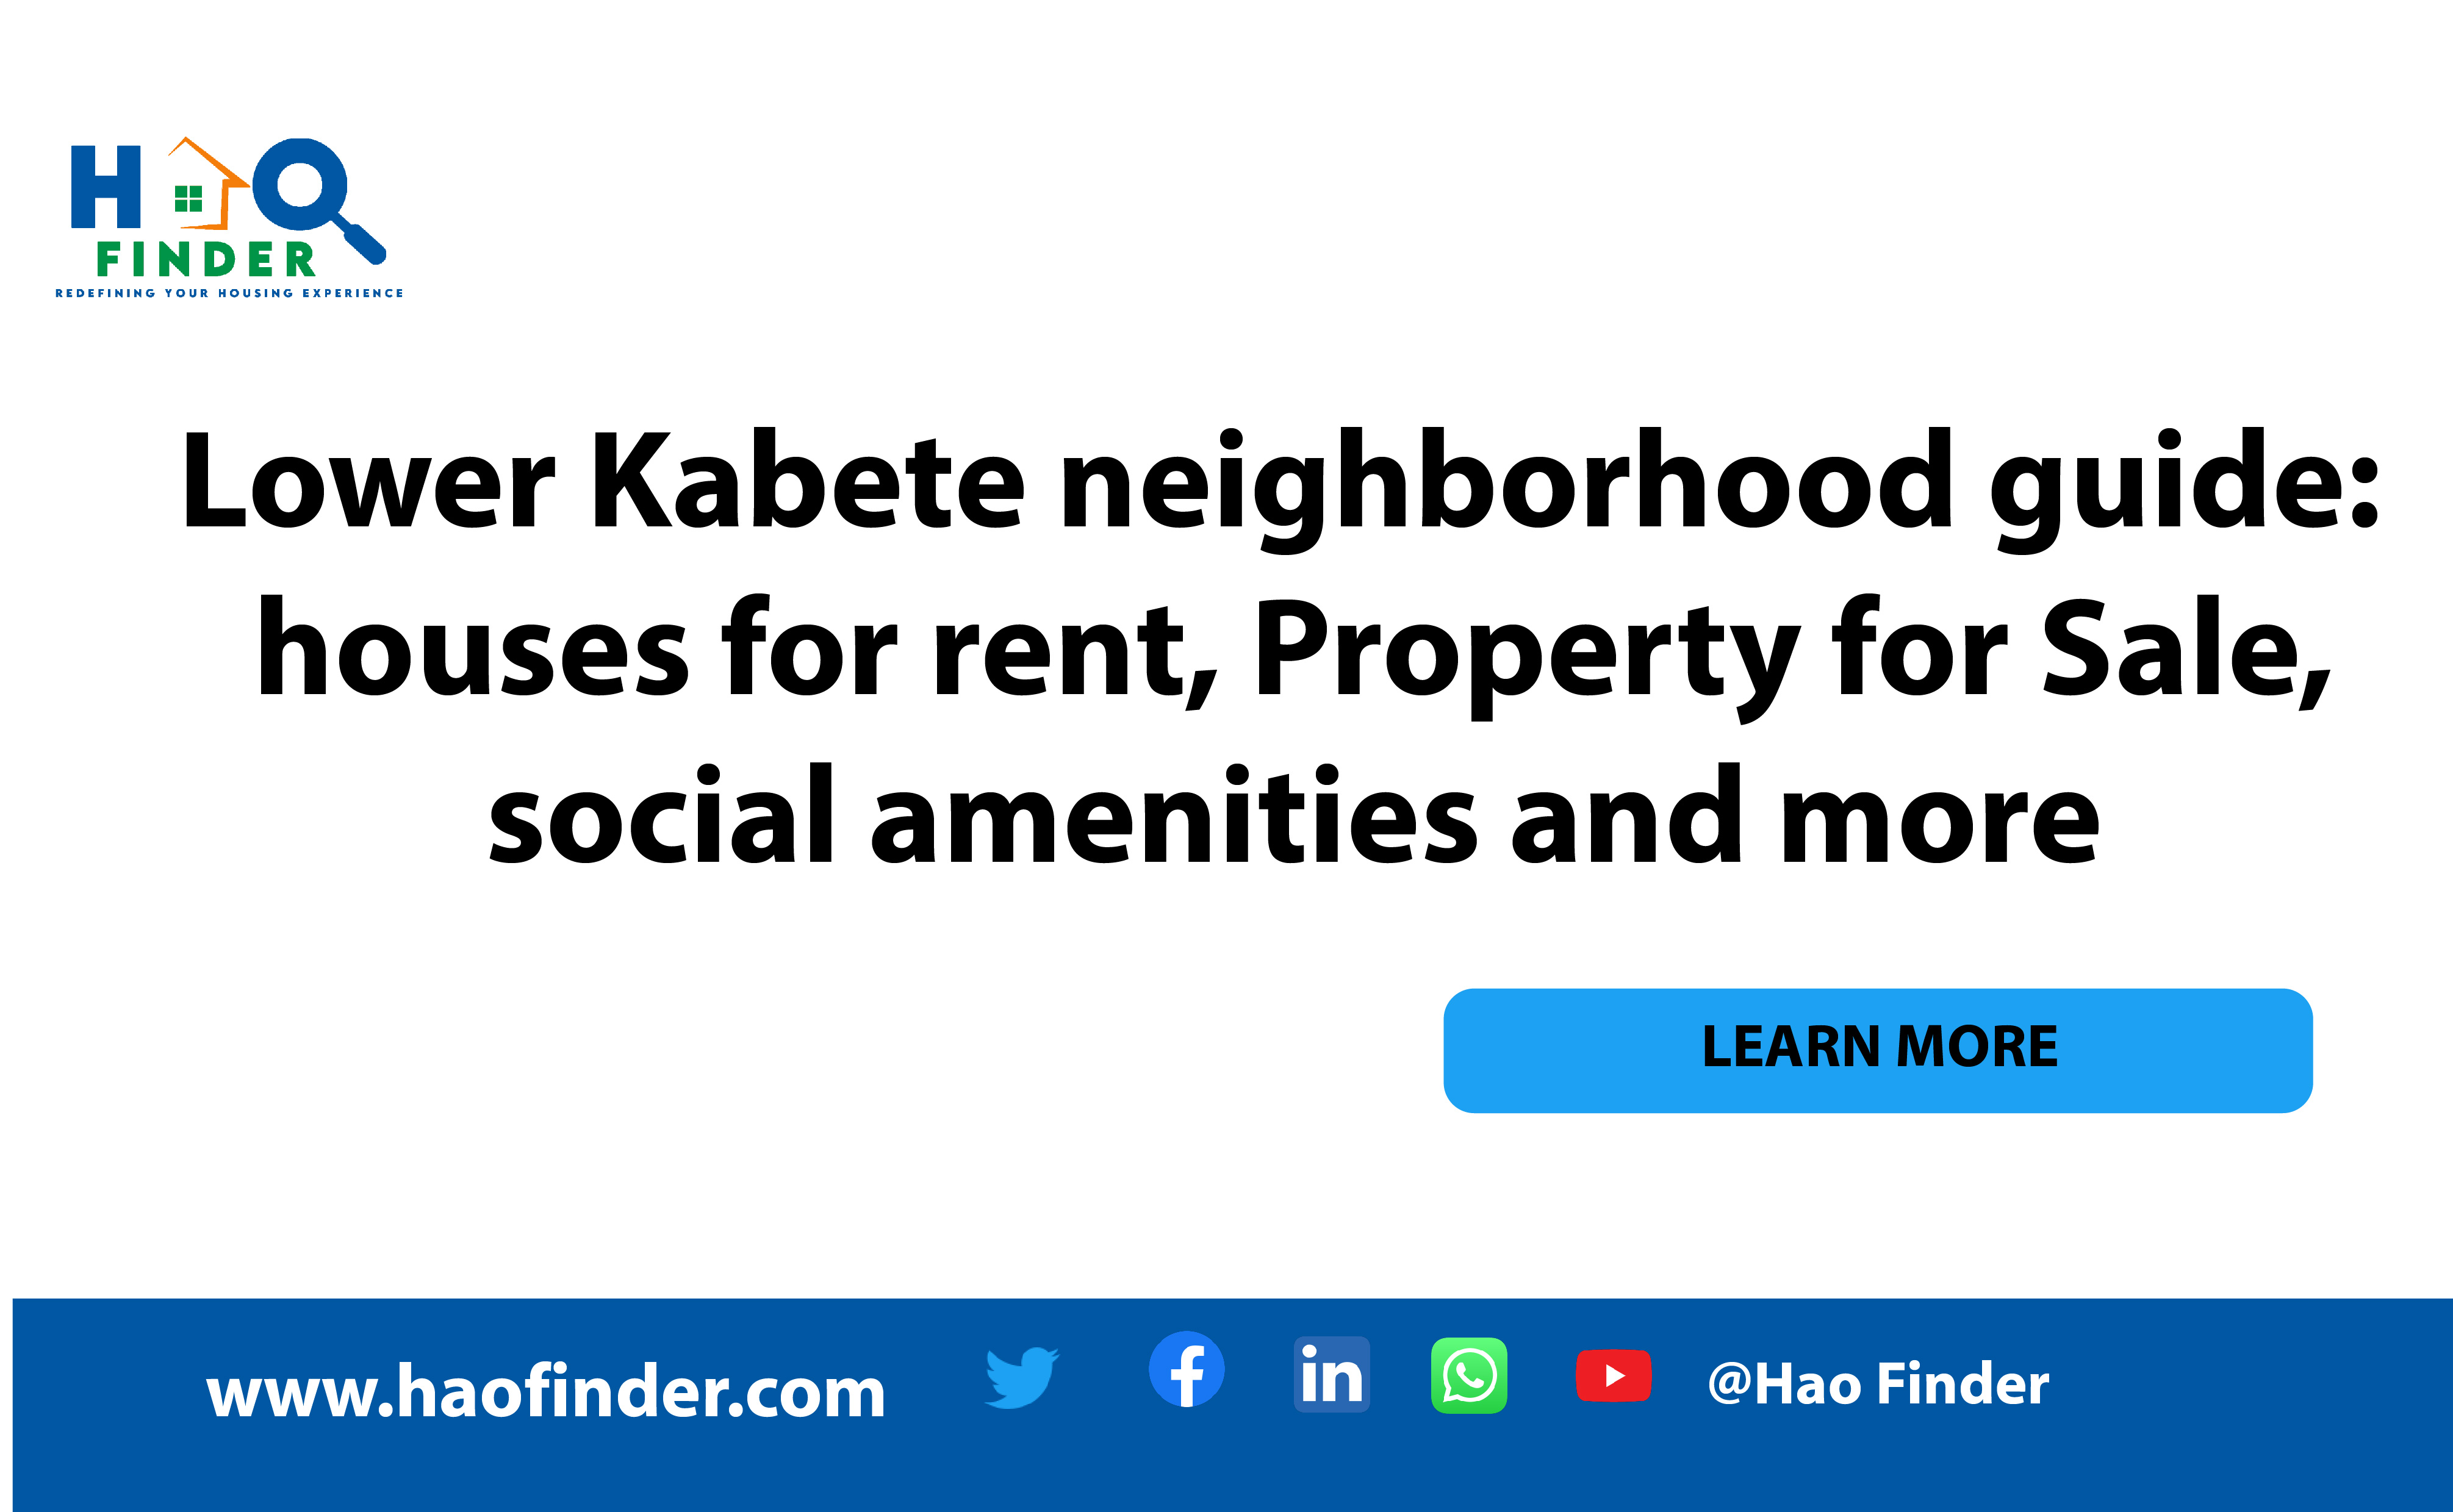  Lower Kabete neighborhood guide:  houses for rent, social amenities and more